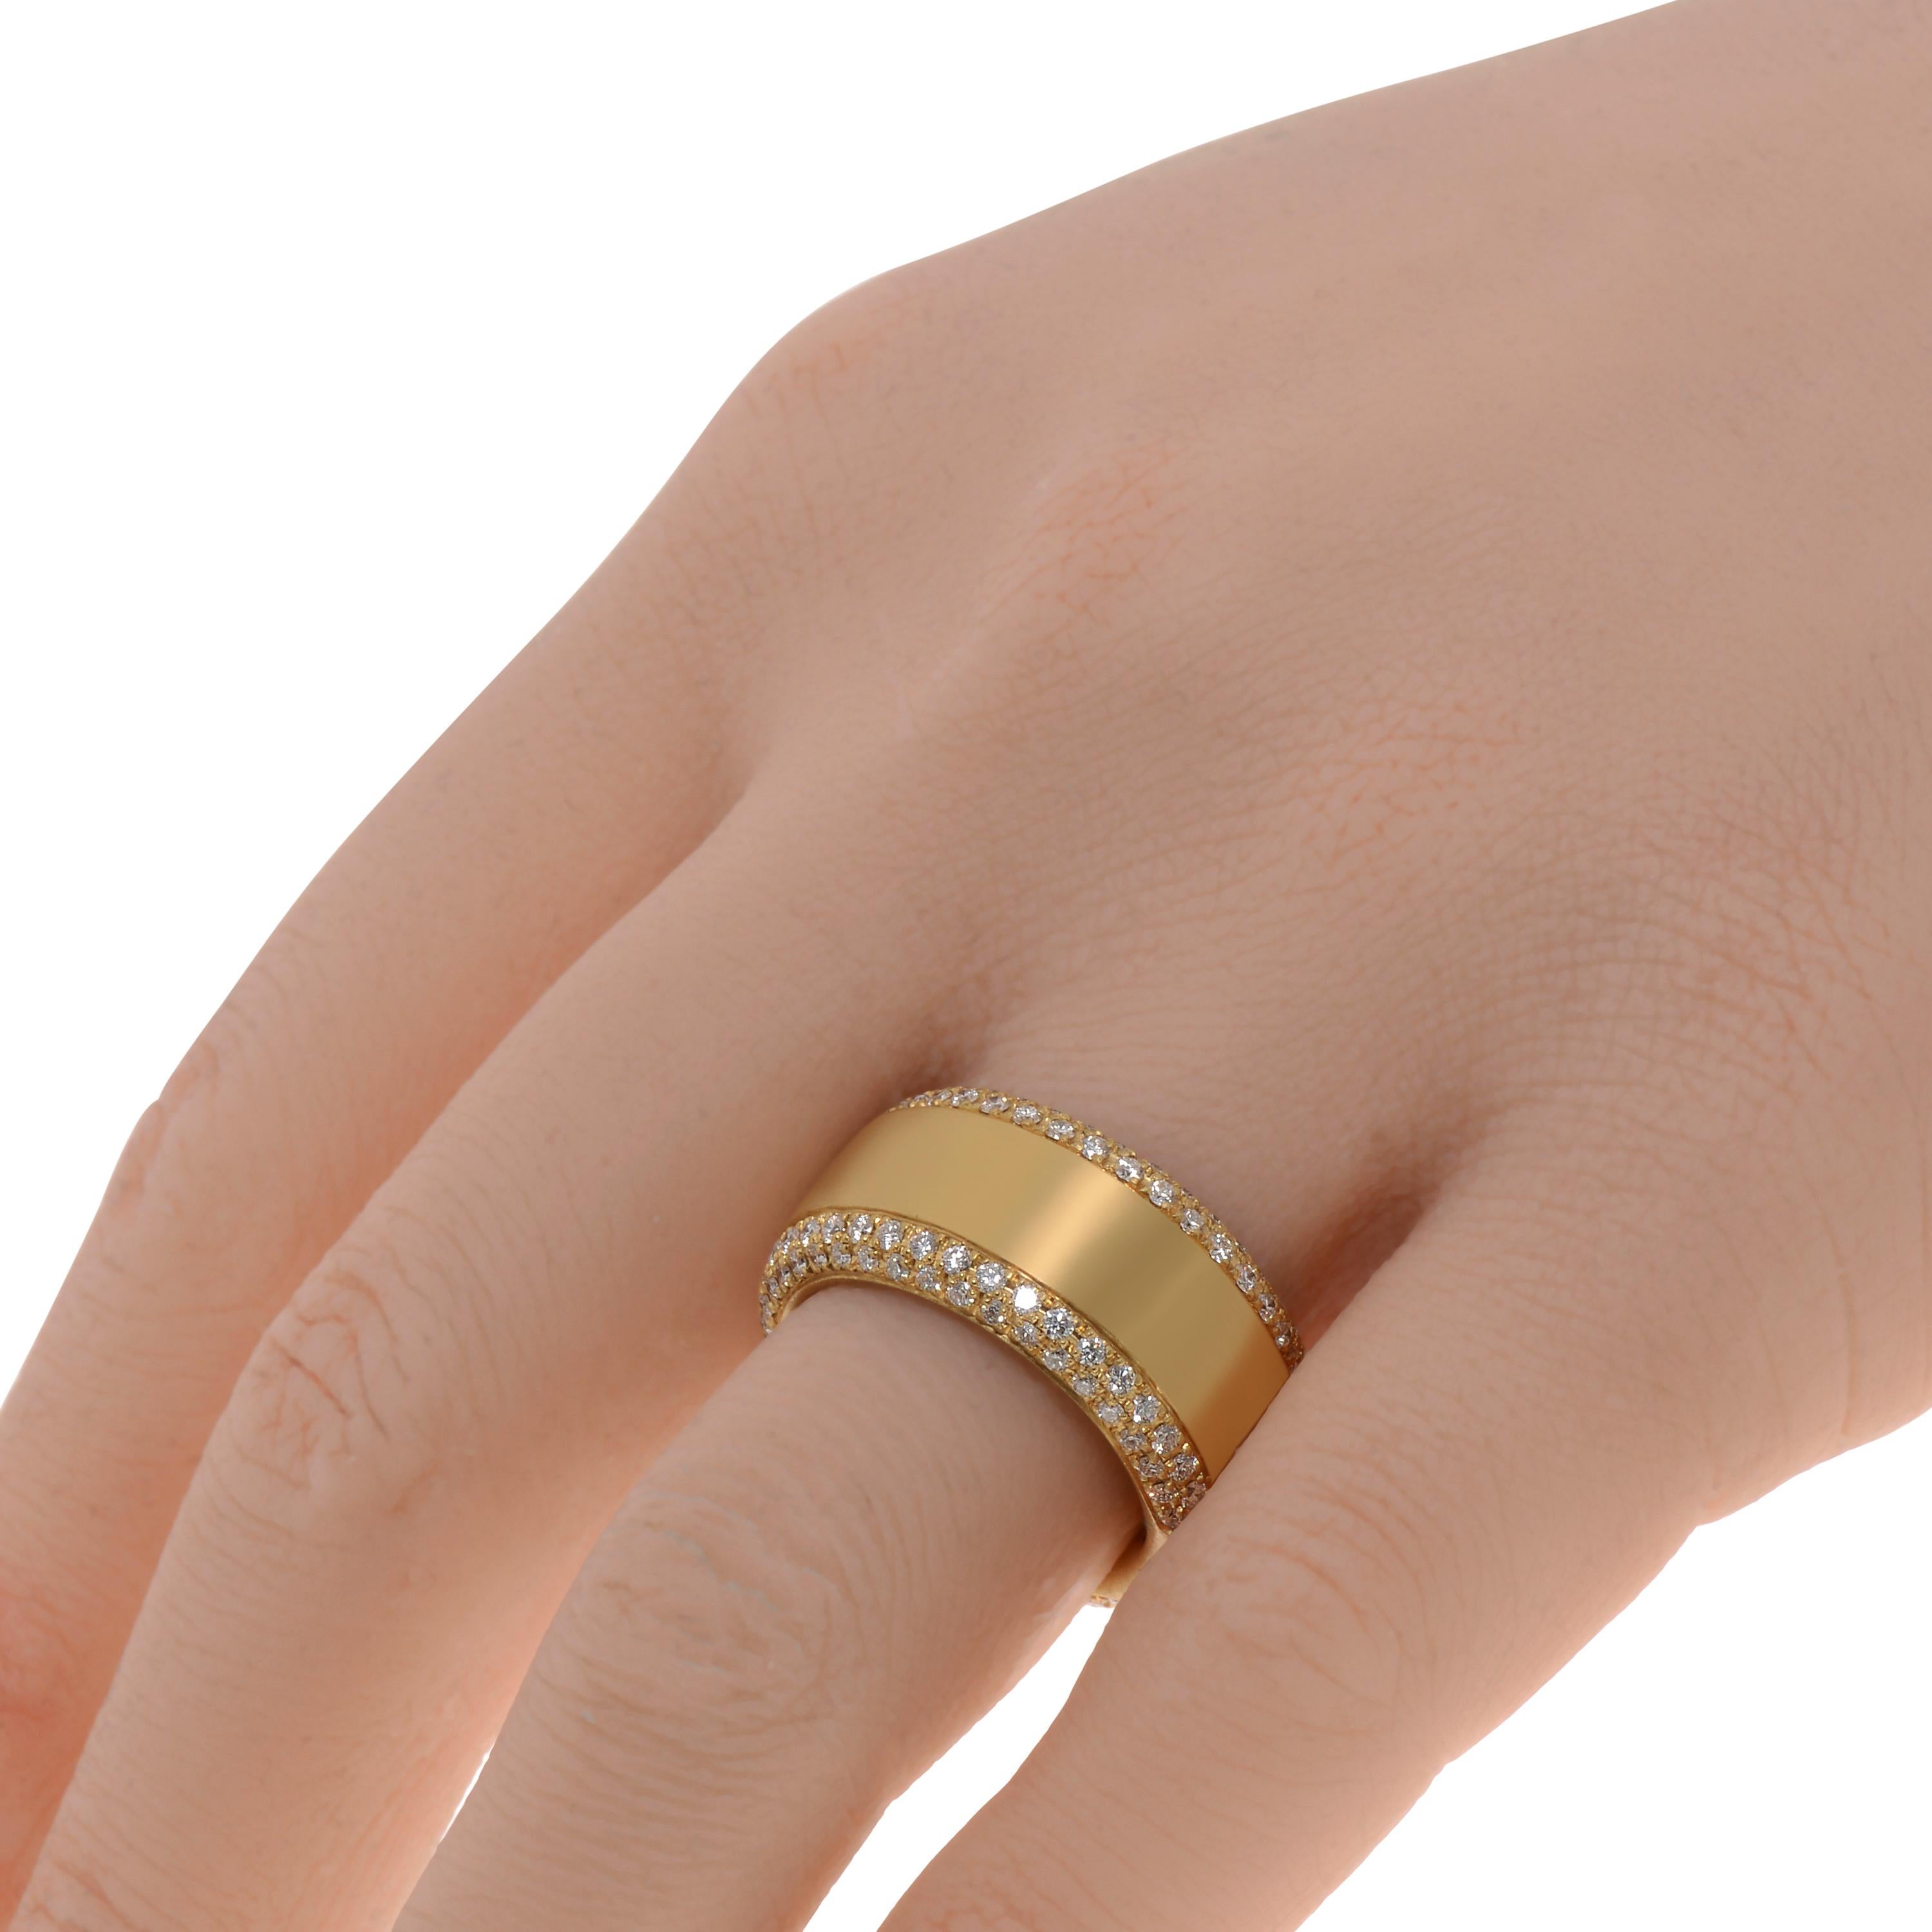 This classic Piero Milano 18K Yellow Gold Band Ring features glittering rows of diamond pave 1.25ct. tw. bordering a brushed Yellow Gold band. The ring size is 7 (54.4). The Band Width is 11.1mm. The Weight is 11.5g. Diamond Color: G-H. Diamond